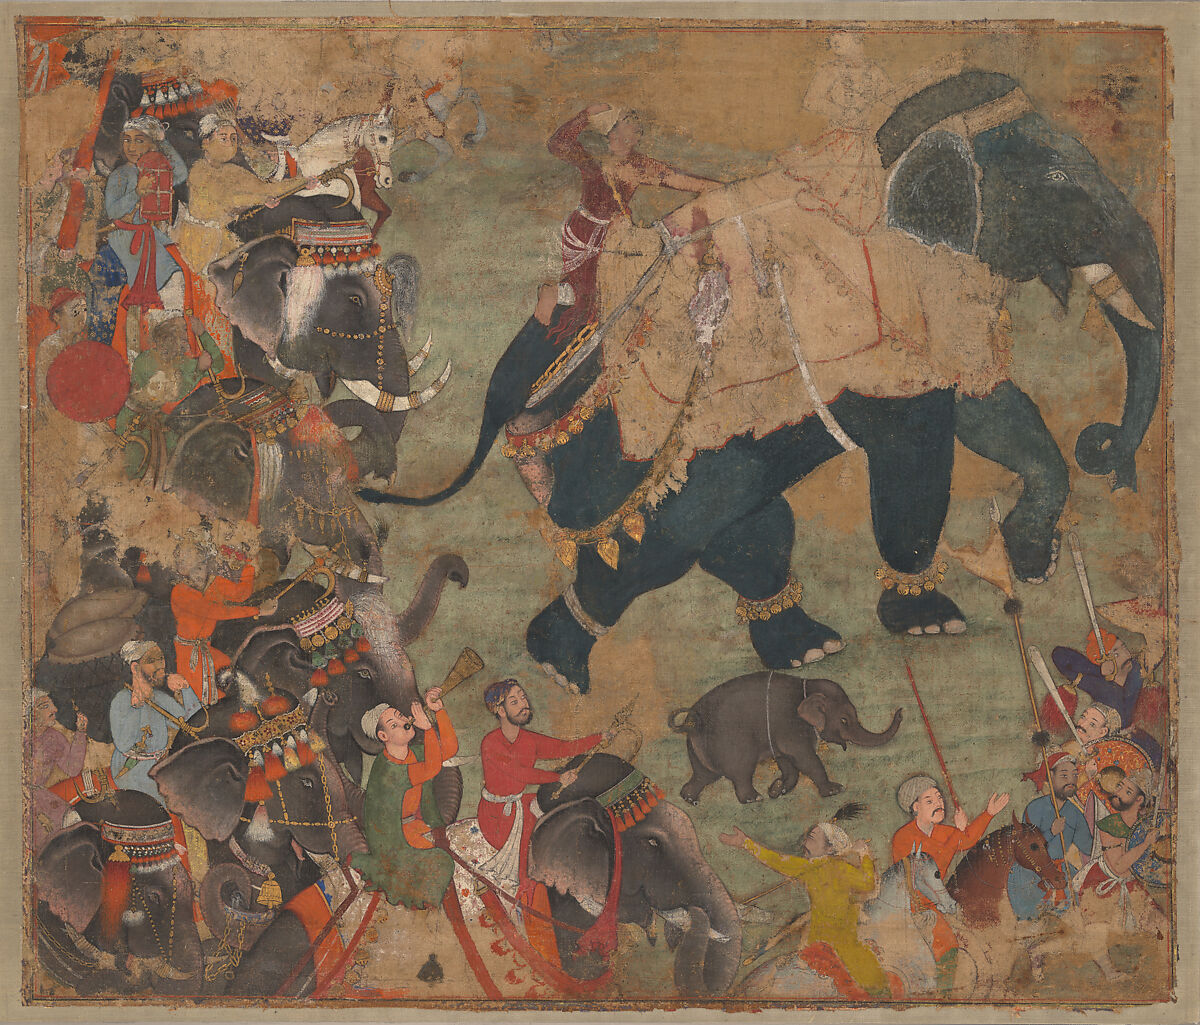 A Prince Riding an Elephant in Procession, Opaque color and gold on cotton cloth